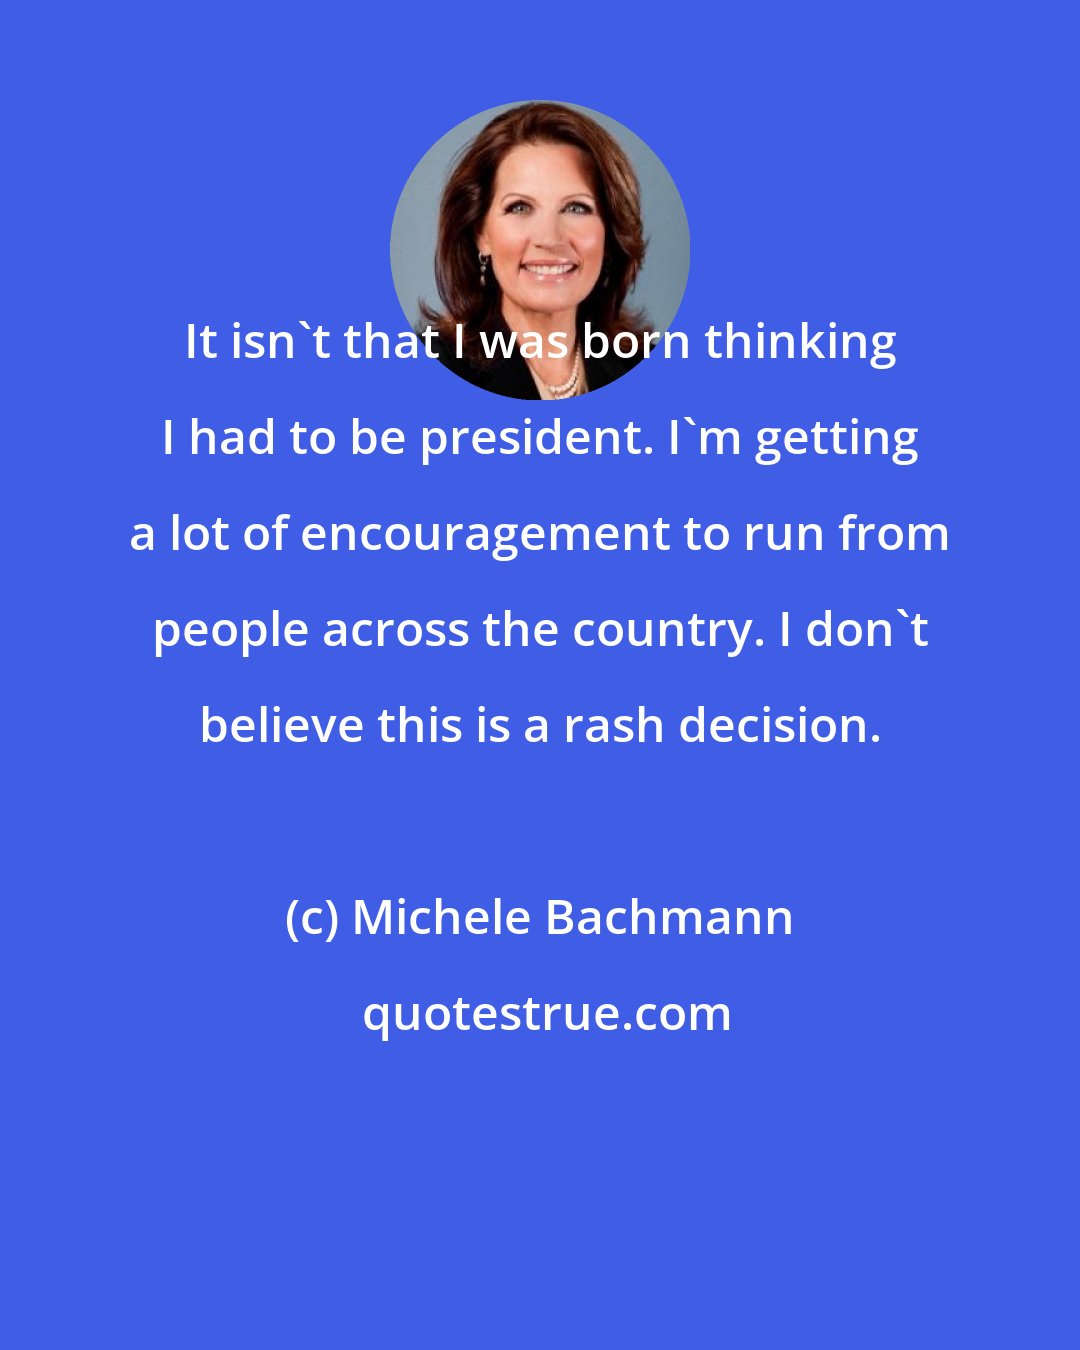 Michele Bachmann: It isn't that I was born thinking I had to be president. I'm getting a lot of encouragement to run from people across the country. I don't believe this is a rash decision.